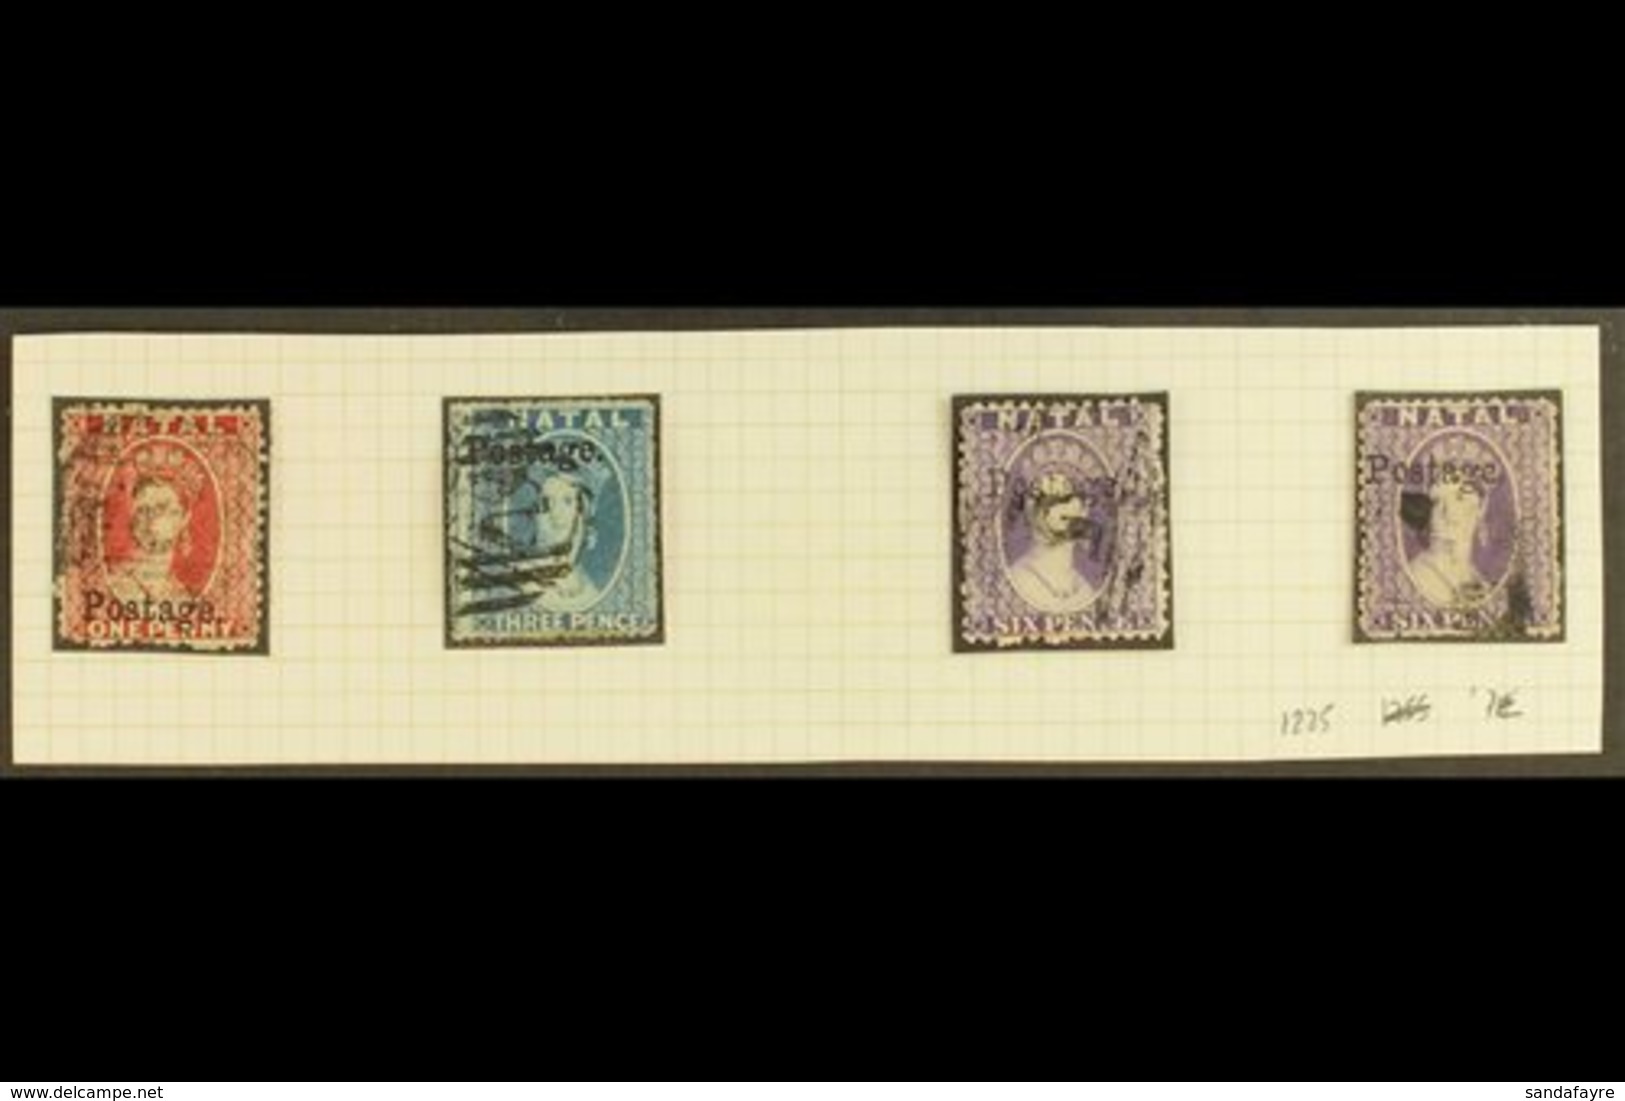 NATAL 1869 "Postage" Ovpts, 13 3/4mm Long, SG Type 7c, 1d Bright Red, 3d Blue Rough Perf, 6d Violet (2), SG 39, 40b, 42, - Ohne Zuordnung